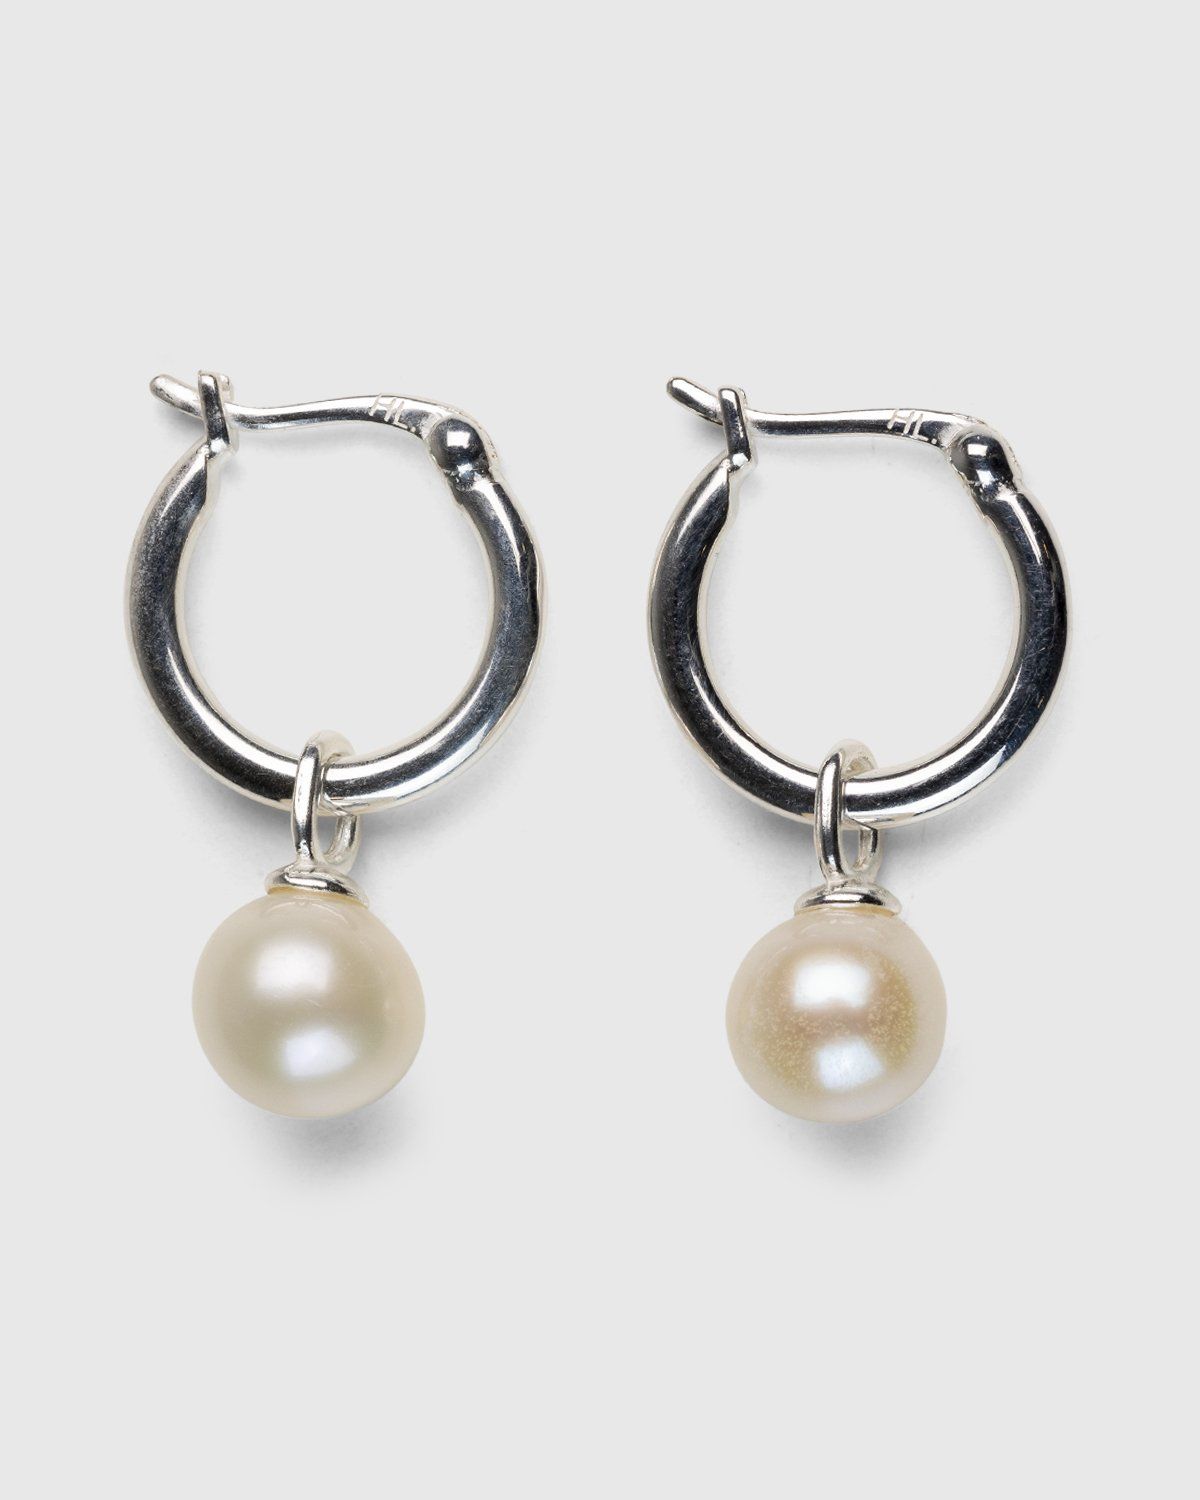 Vintage style Creole earrings in white pearls for women